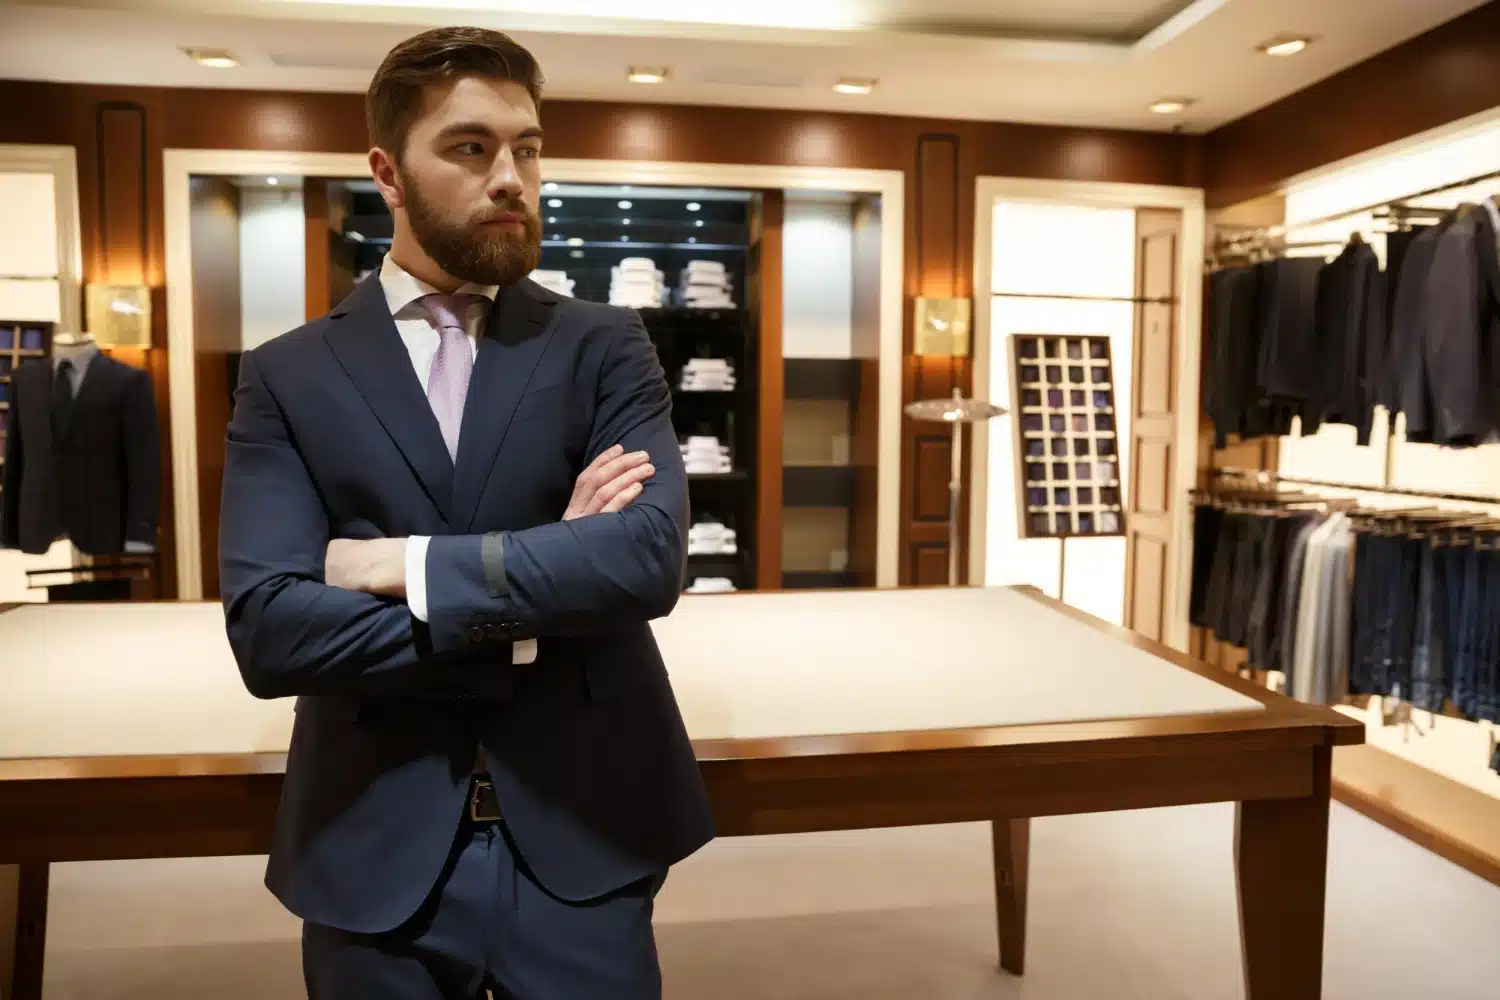 Dress Sharp With Jos. A Bank’s Tailored Men’s Clothing